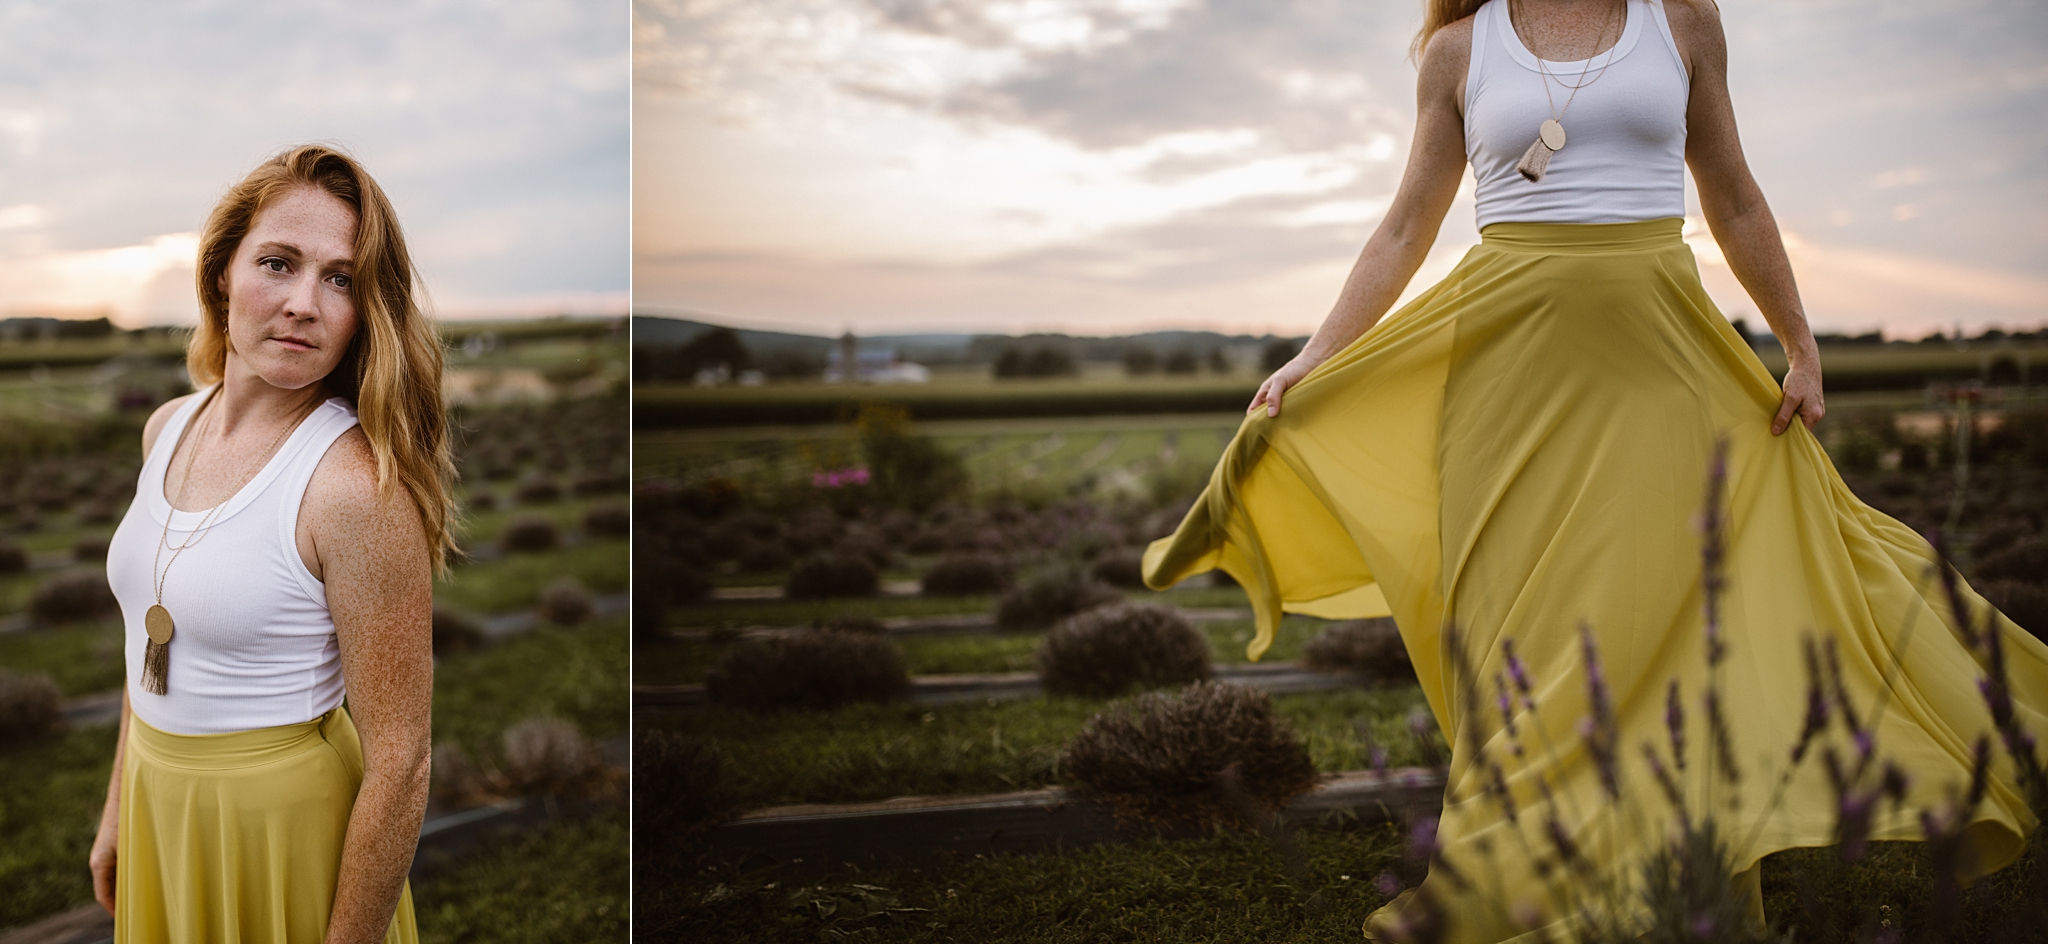 Red headed woman in yellow skirt at sunset in a lavender field.